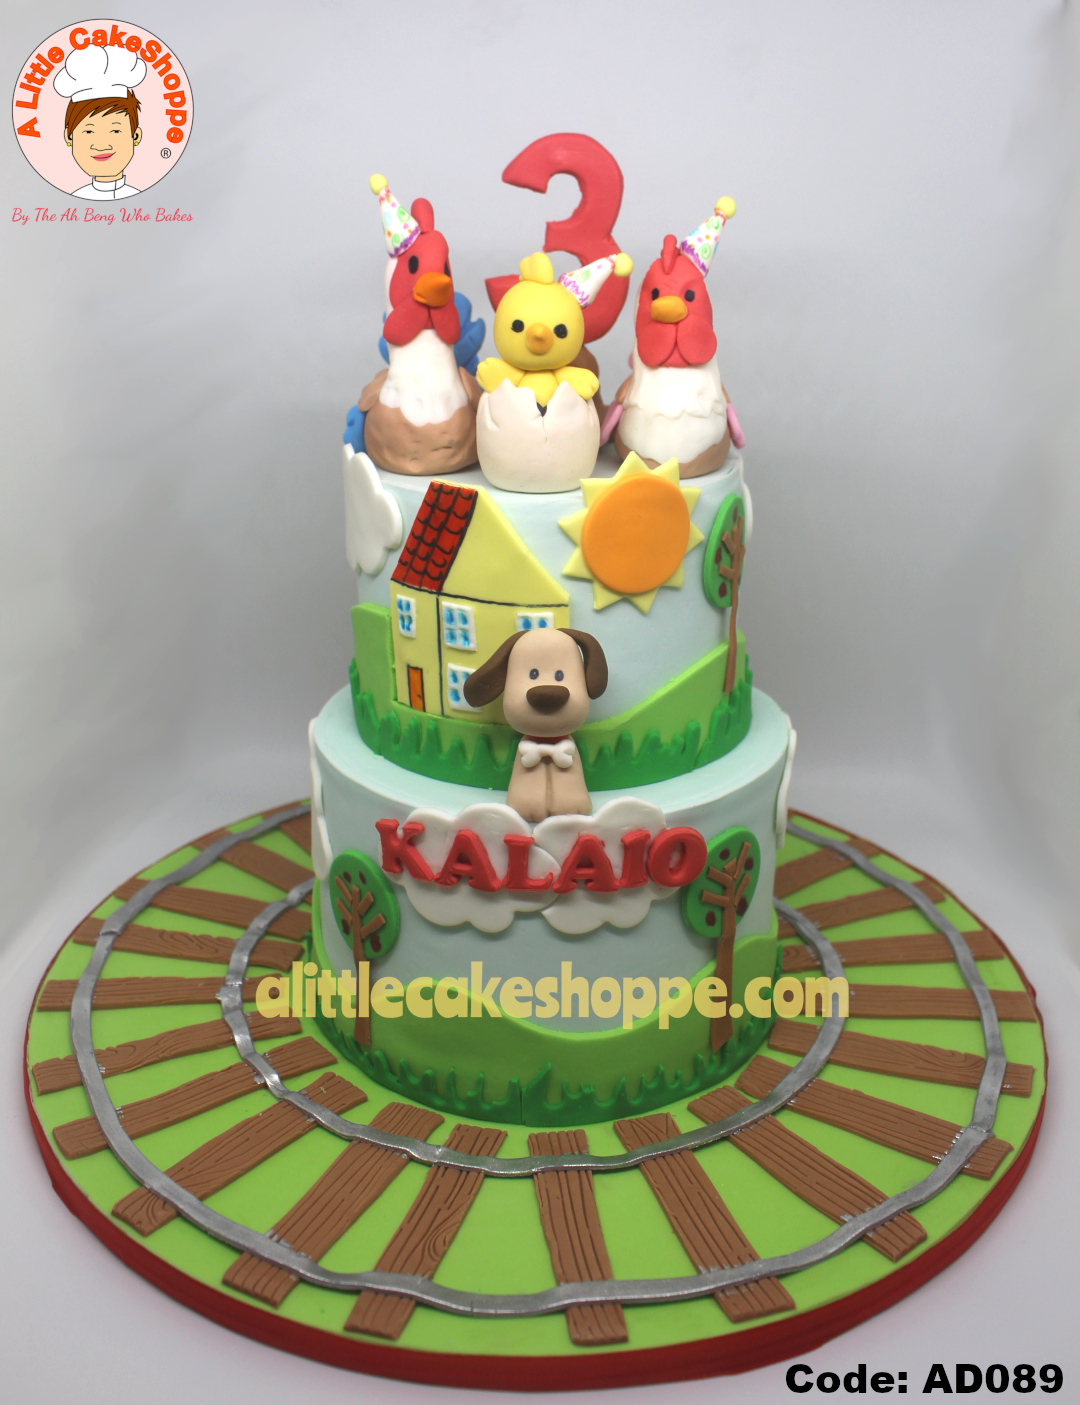 Best Cake Shop Singapore Delivery Best Customised Cake Shop Singapore customise cake custom cake 2D 3D birthday cake cupcakes desserts wedding corporate events anniversary 1st birthday 21st birthday fondant fresh cream buttercream cakes alittlecakeshoppe a little cake shoppe compliments review singapore bakers SG cake shop cakeshop ah beng who bakes sgbakes novelty cakes sgcakes licensed sfa nea cake delivery celebration cakes kids birthday cake surprise cake adult children animal safari dog duck